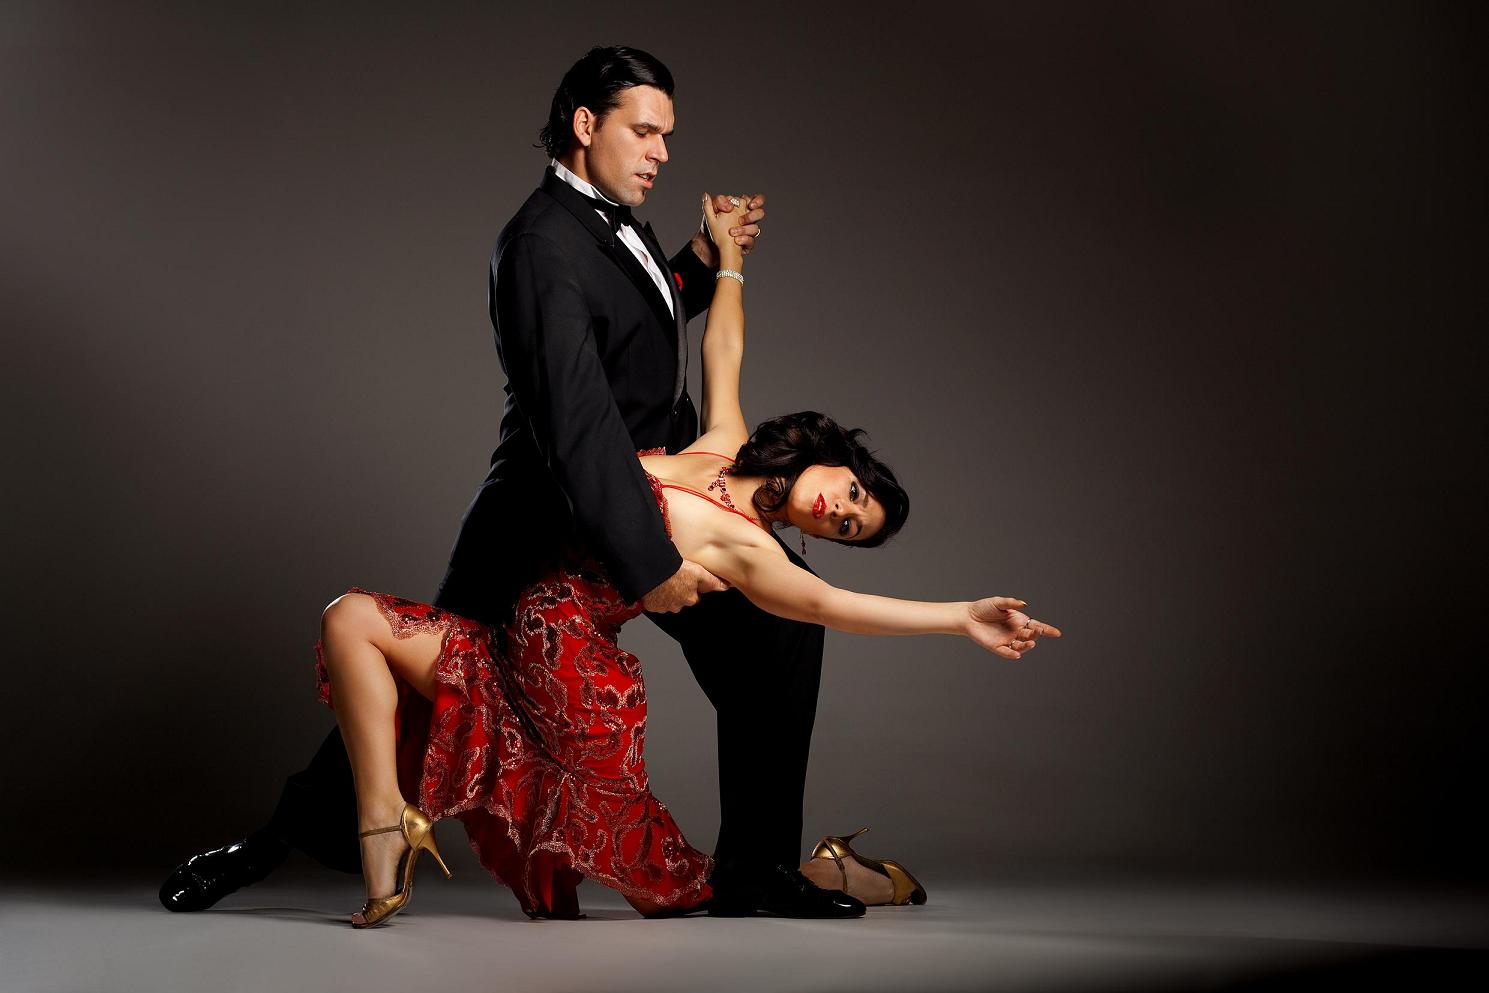 How Tango Forever Changed My Life Both Professionally and Personally